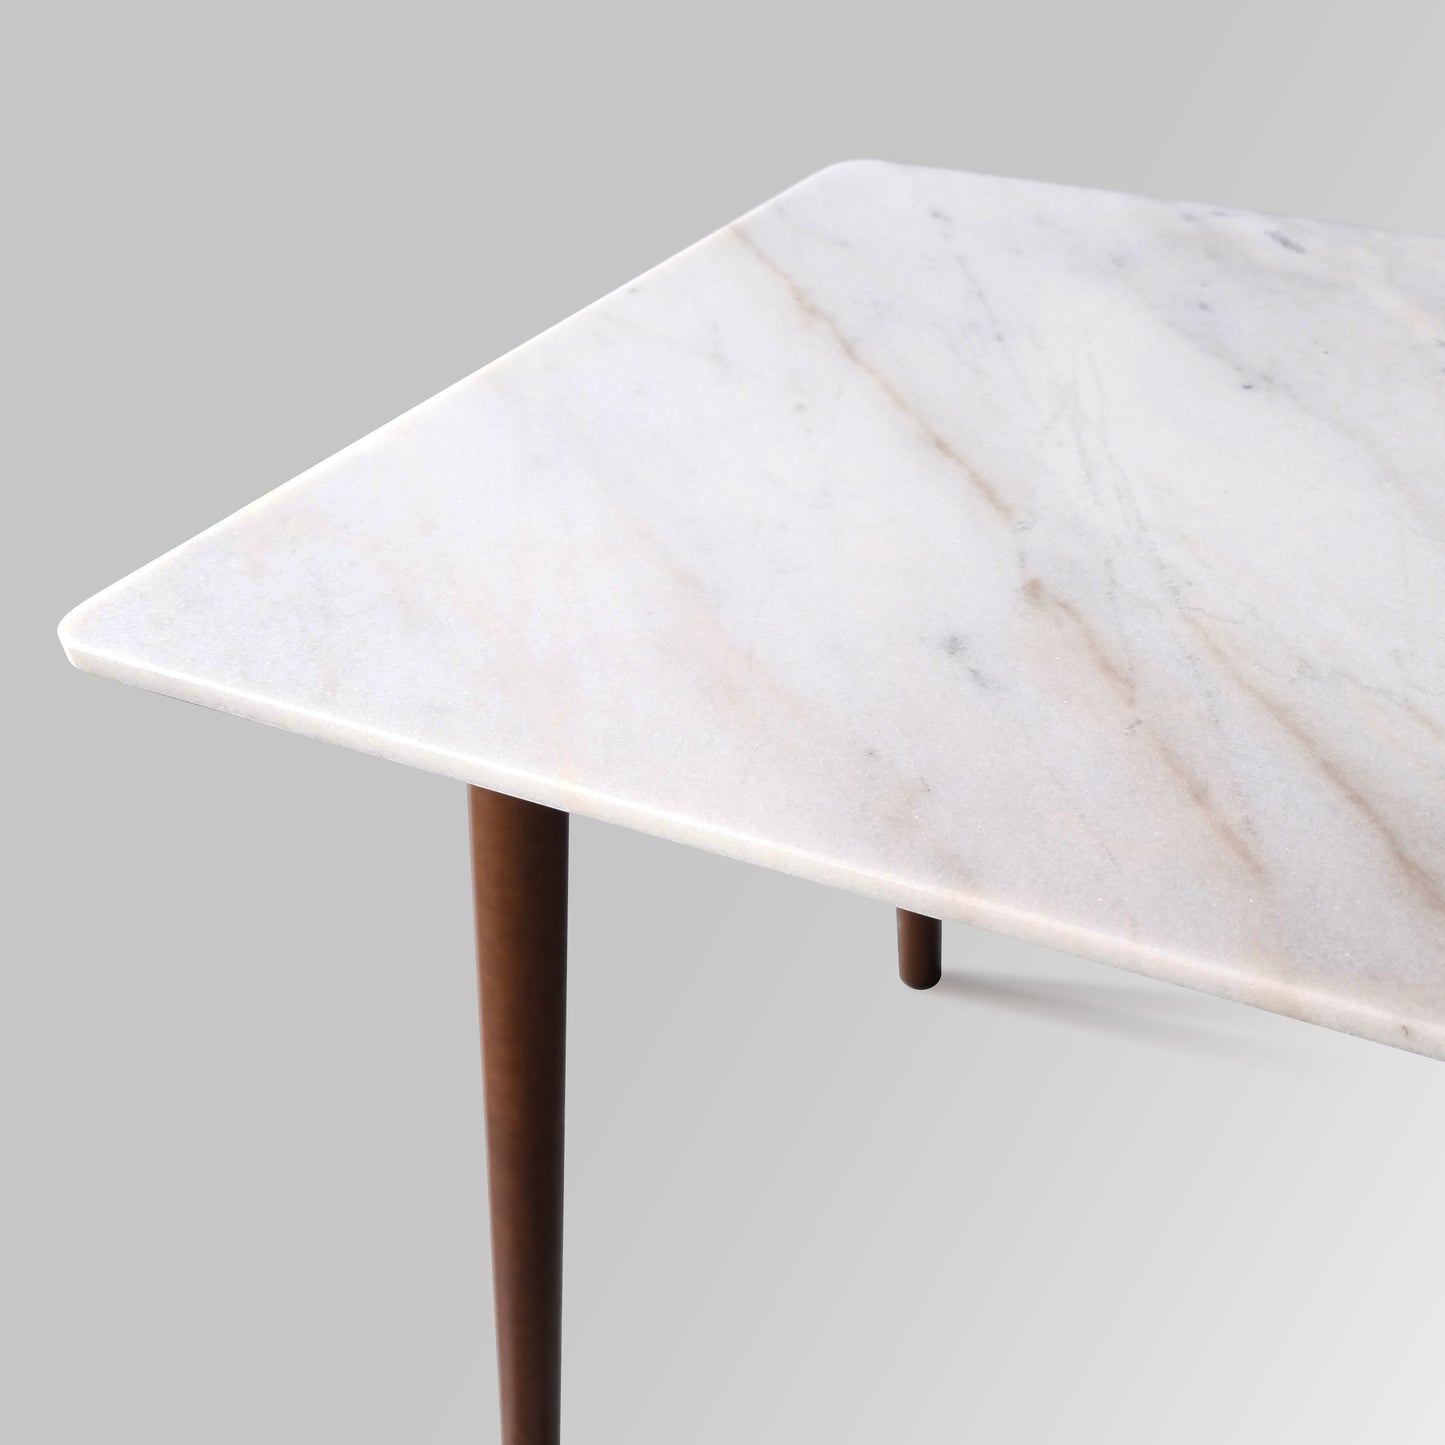 Natural Marble Mastercrafted Luxury Dining Table with Six Popular Colors